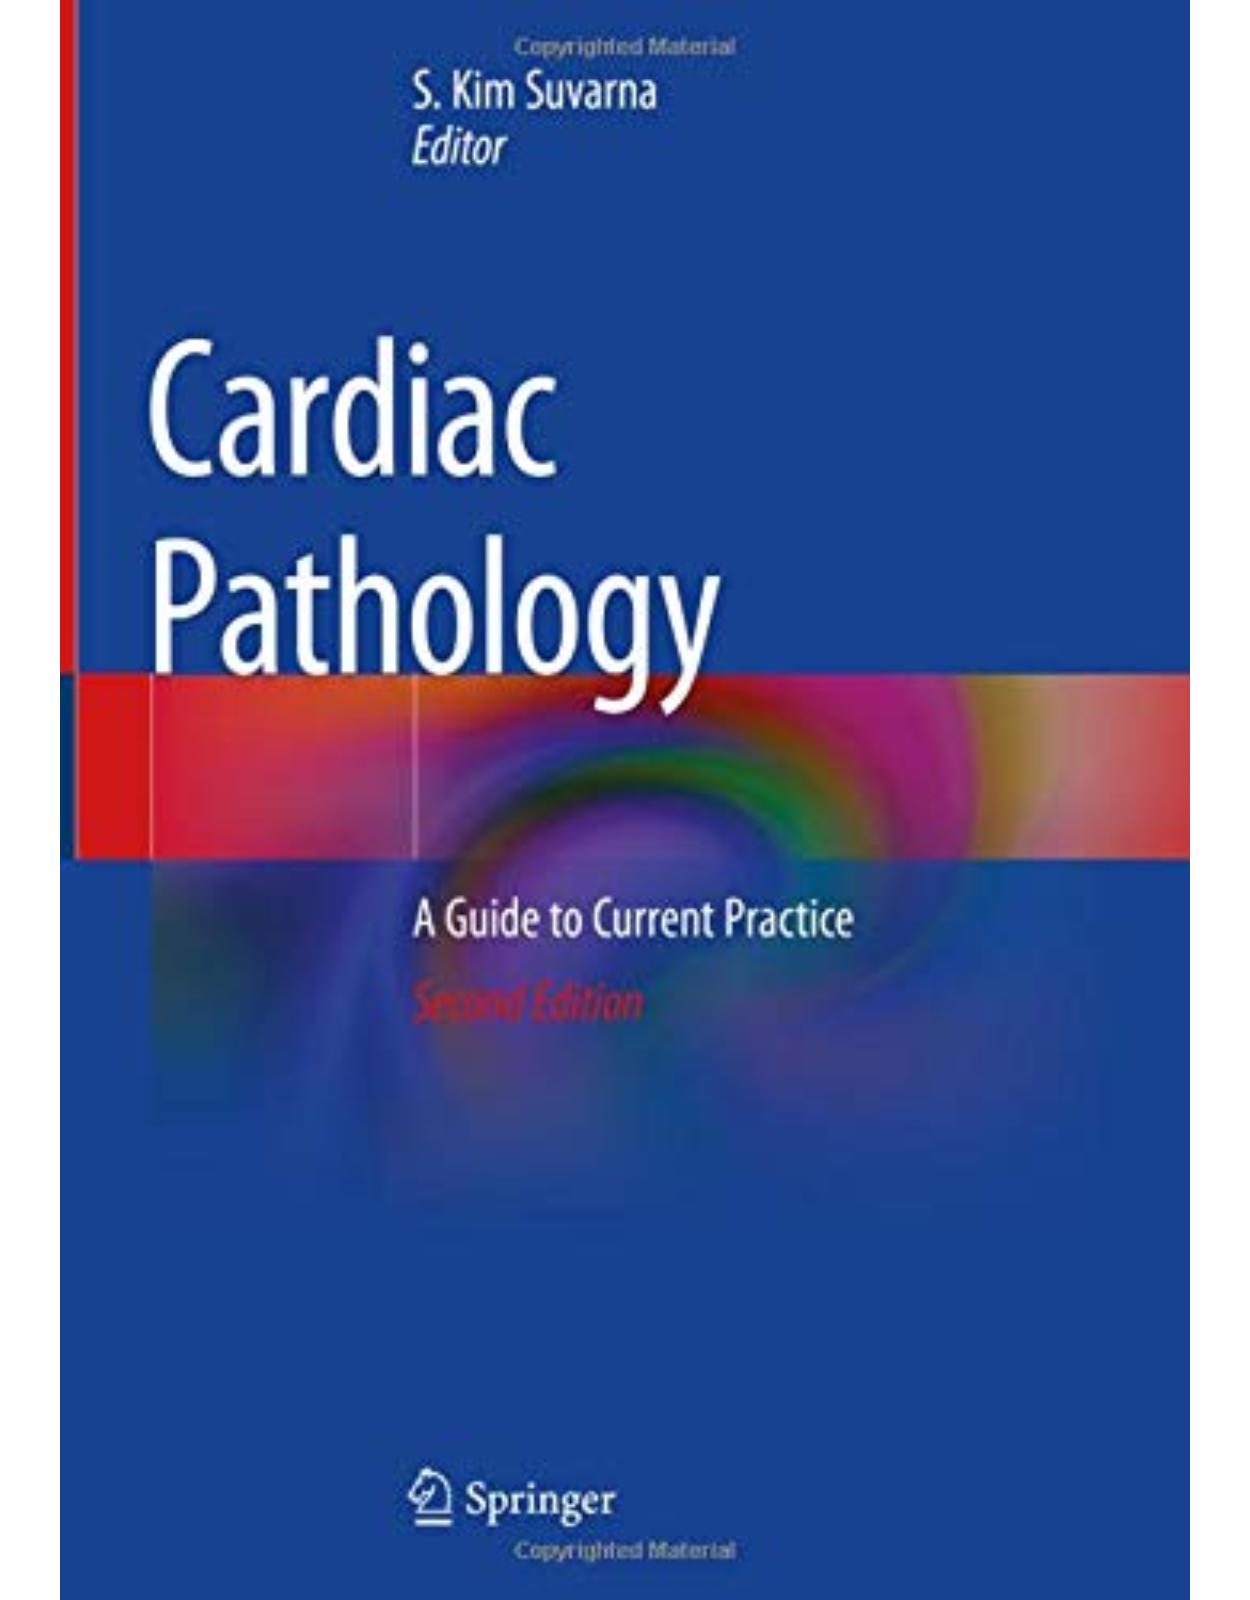 Cardiac Pathology: A Guide to Current Practice